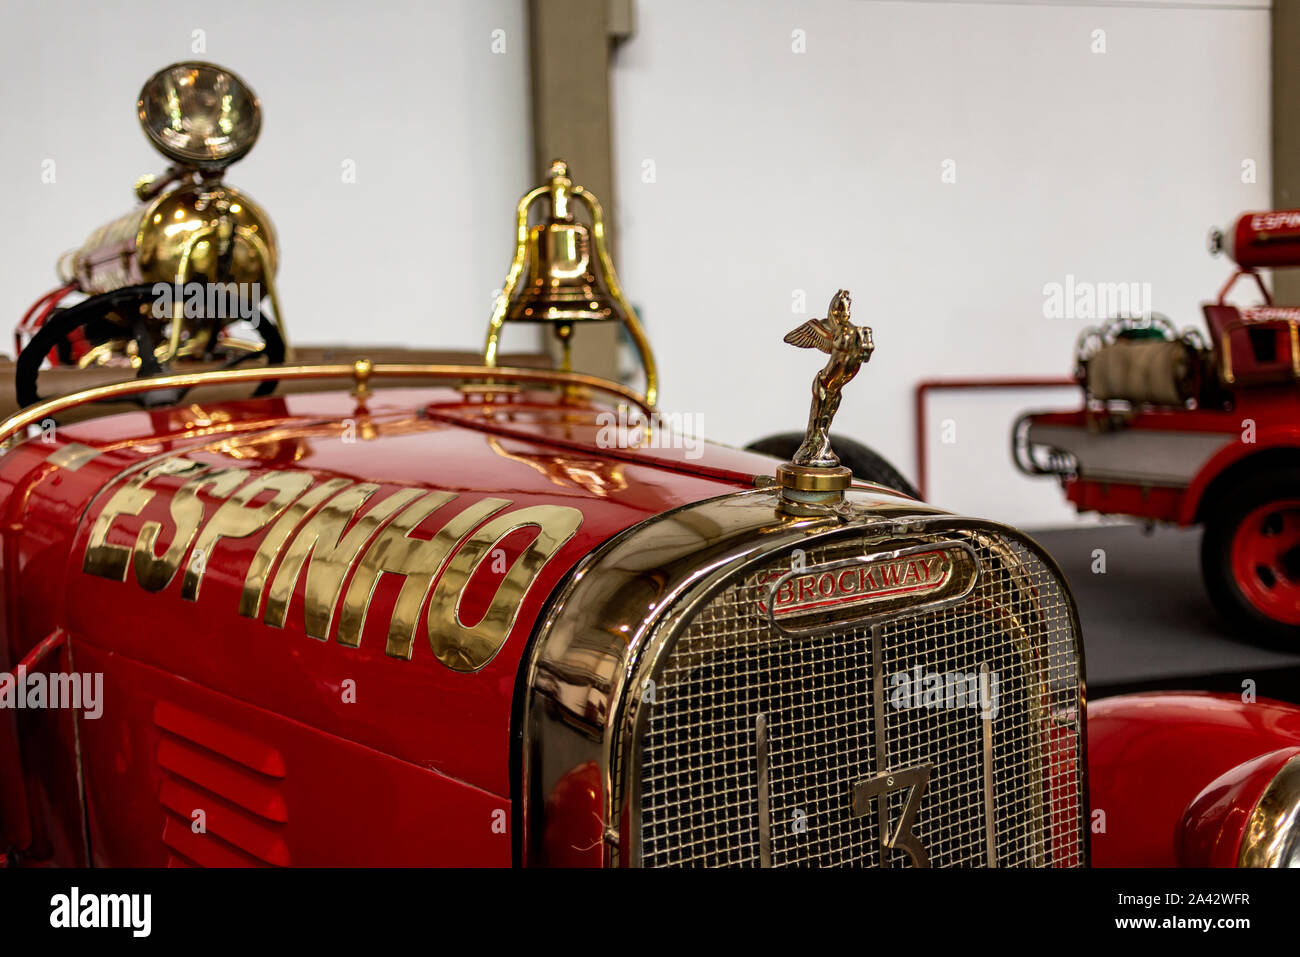 Old fire trucks from Espinho Stock Photo